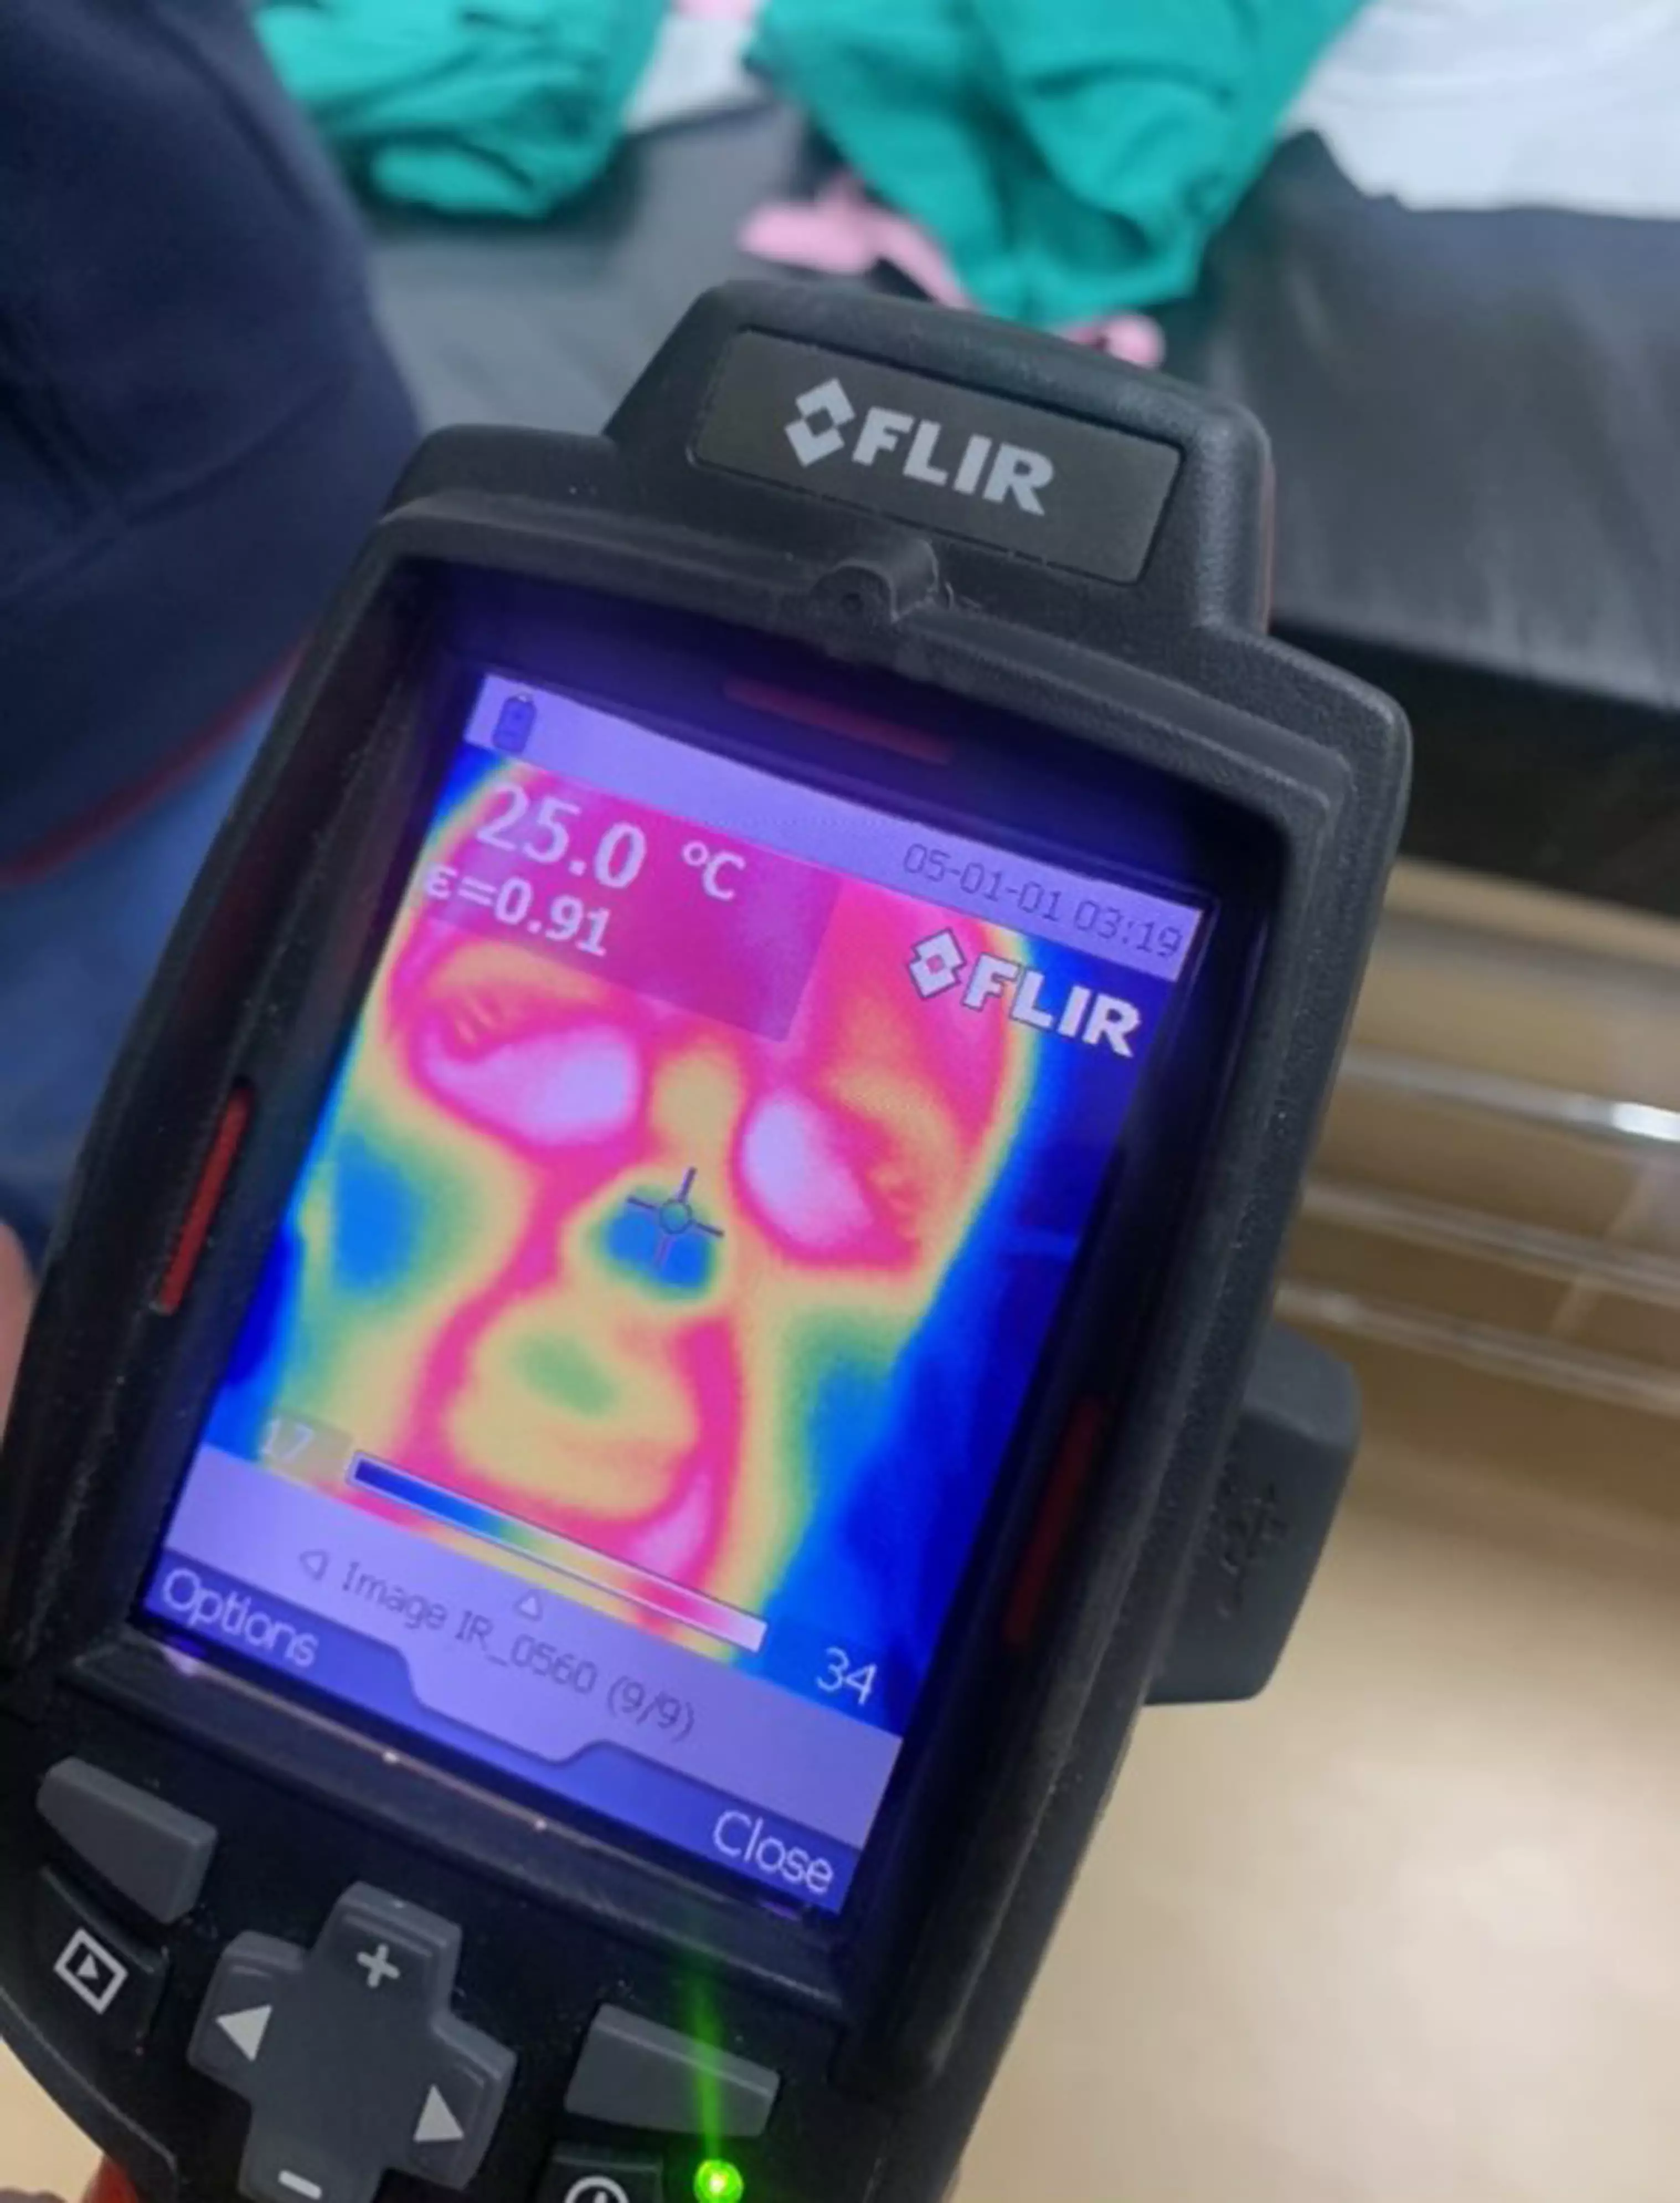 Thermal imaging showed that no blood was reaching the nose (